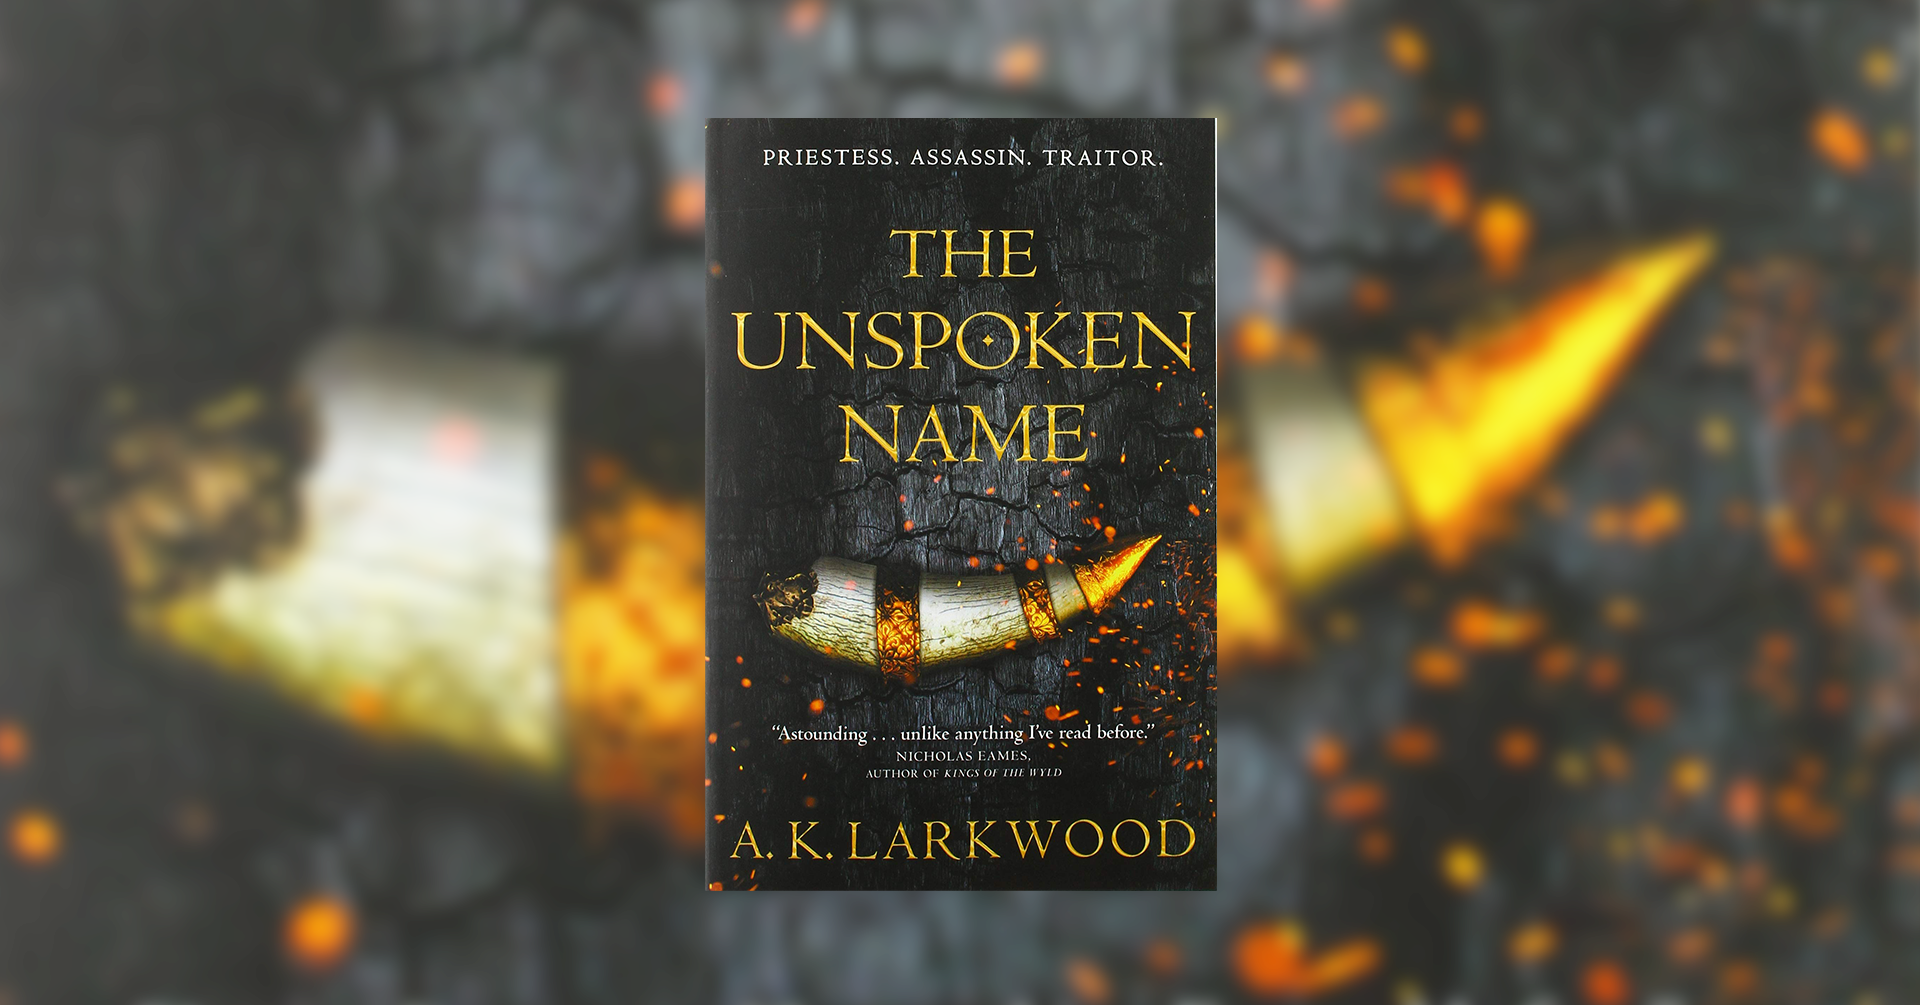 Book Club: The Unspoken Name